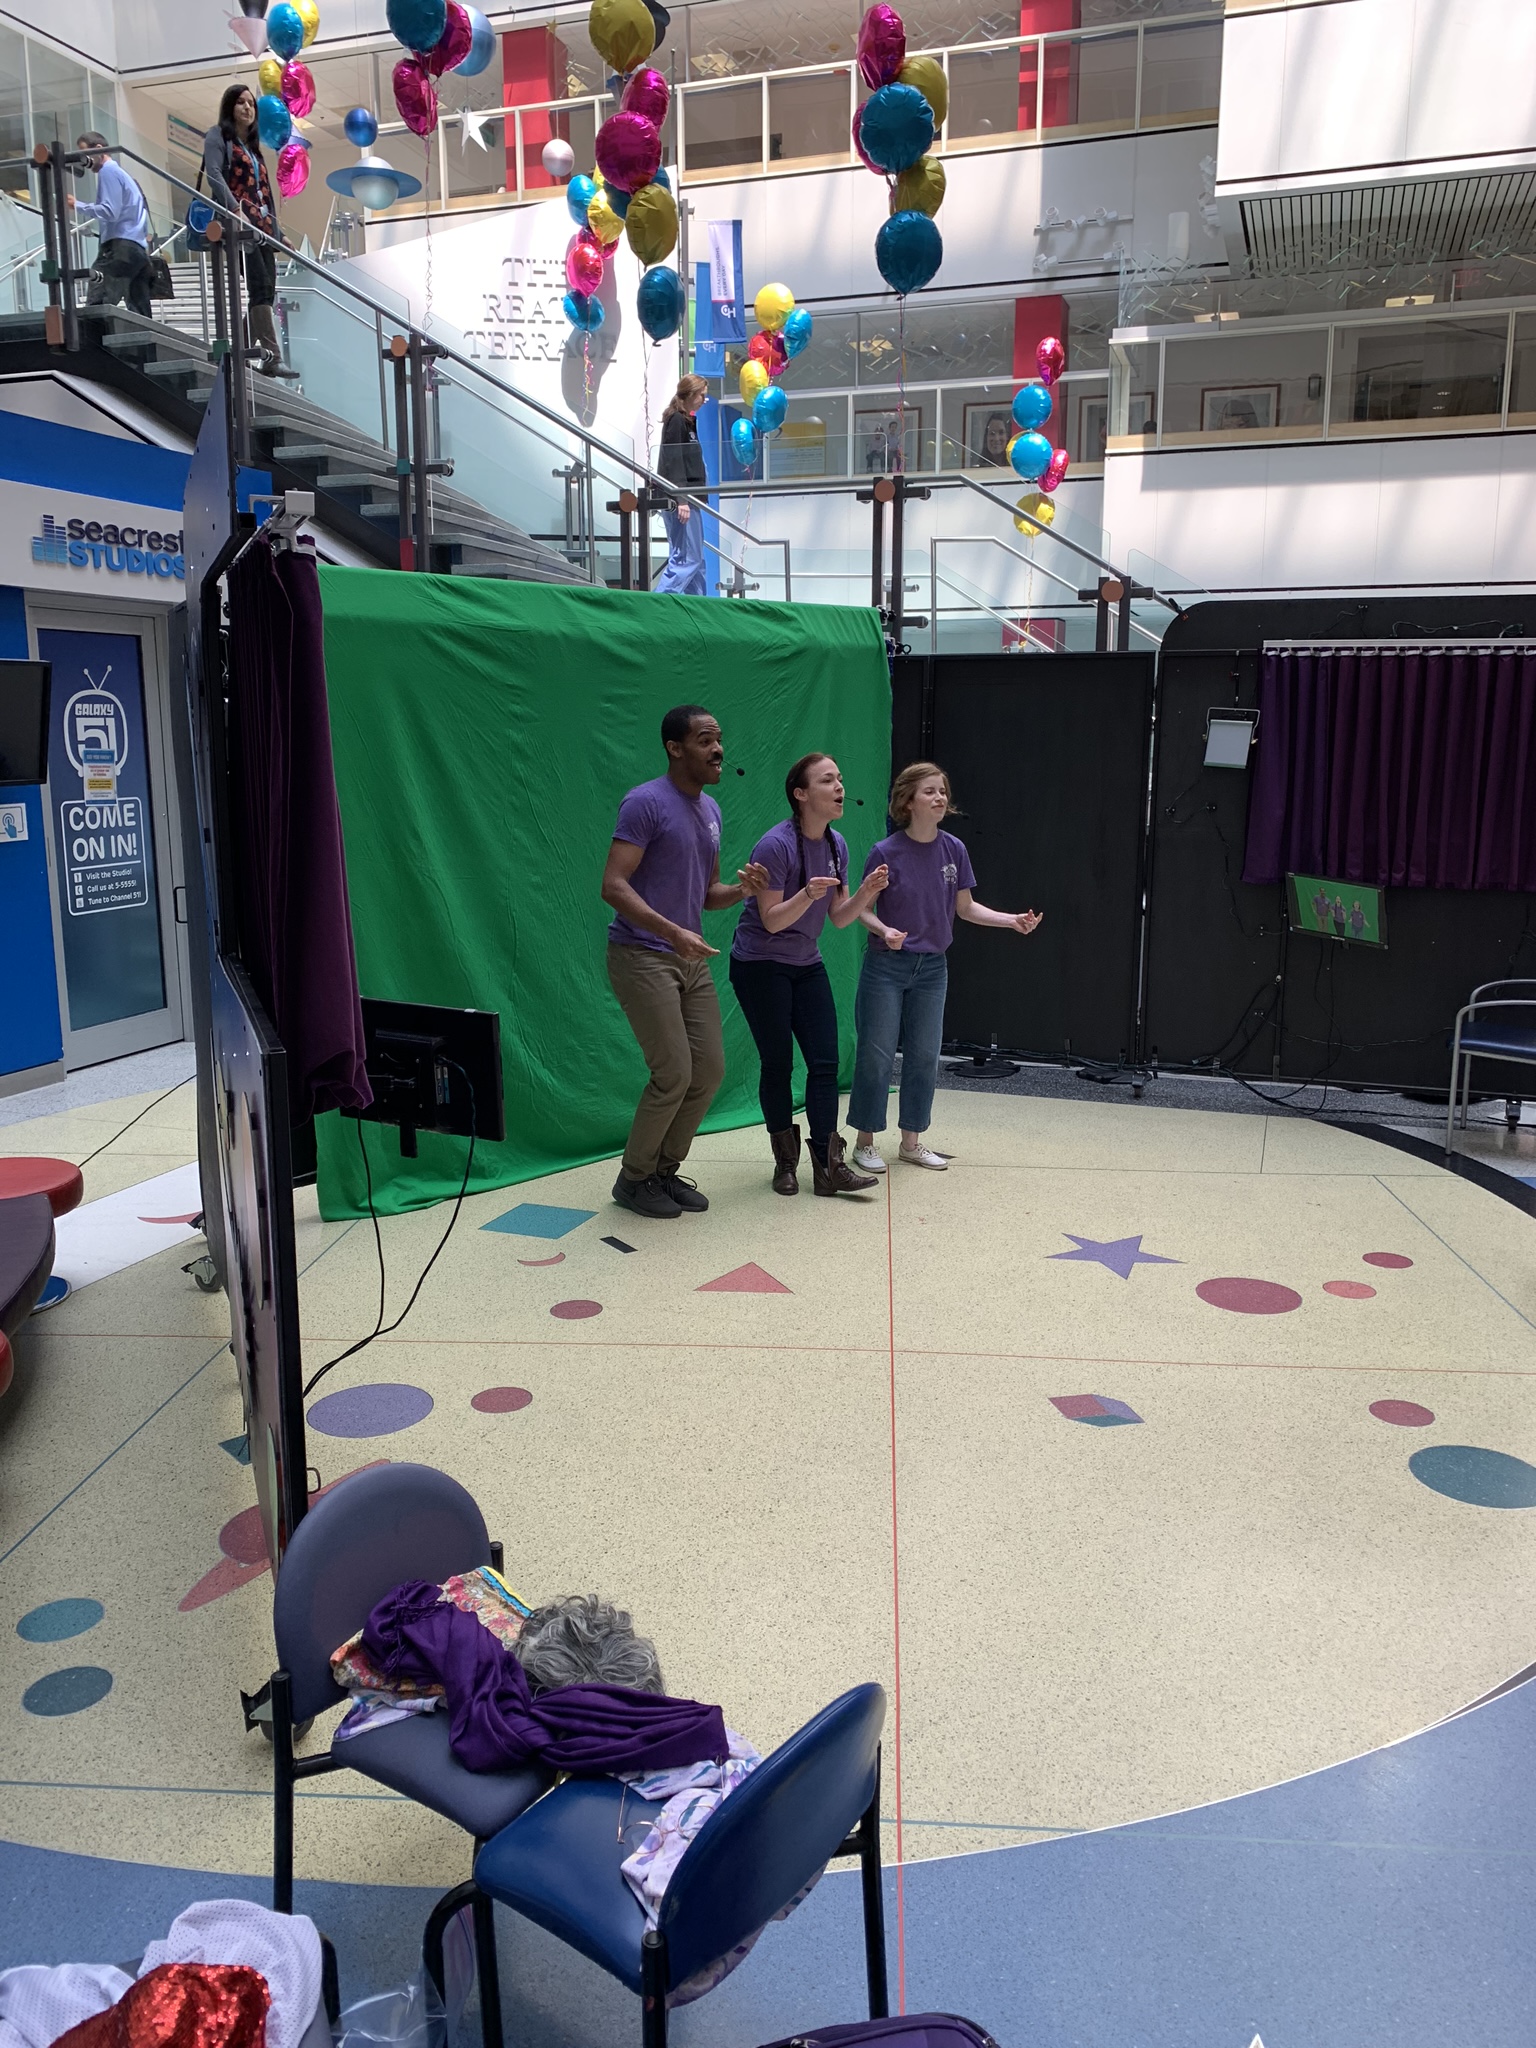 Actors performing in front of a green screen